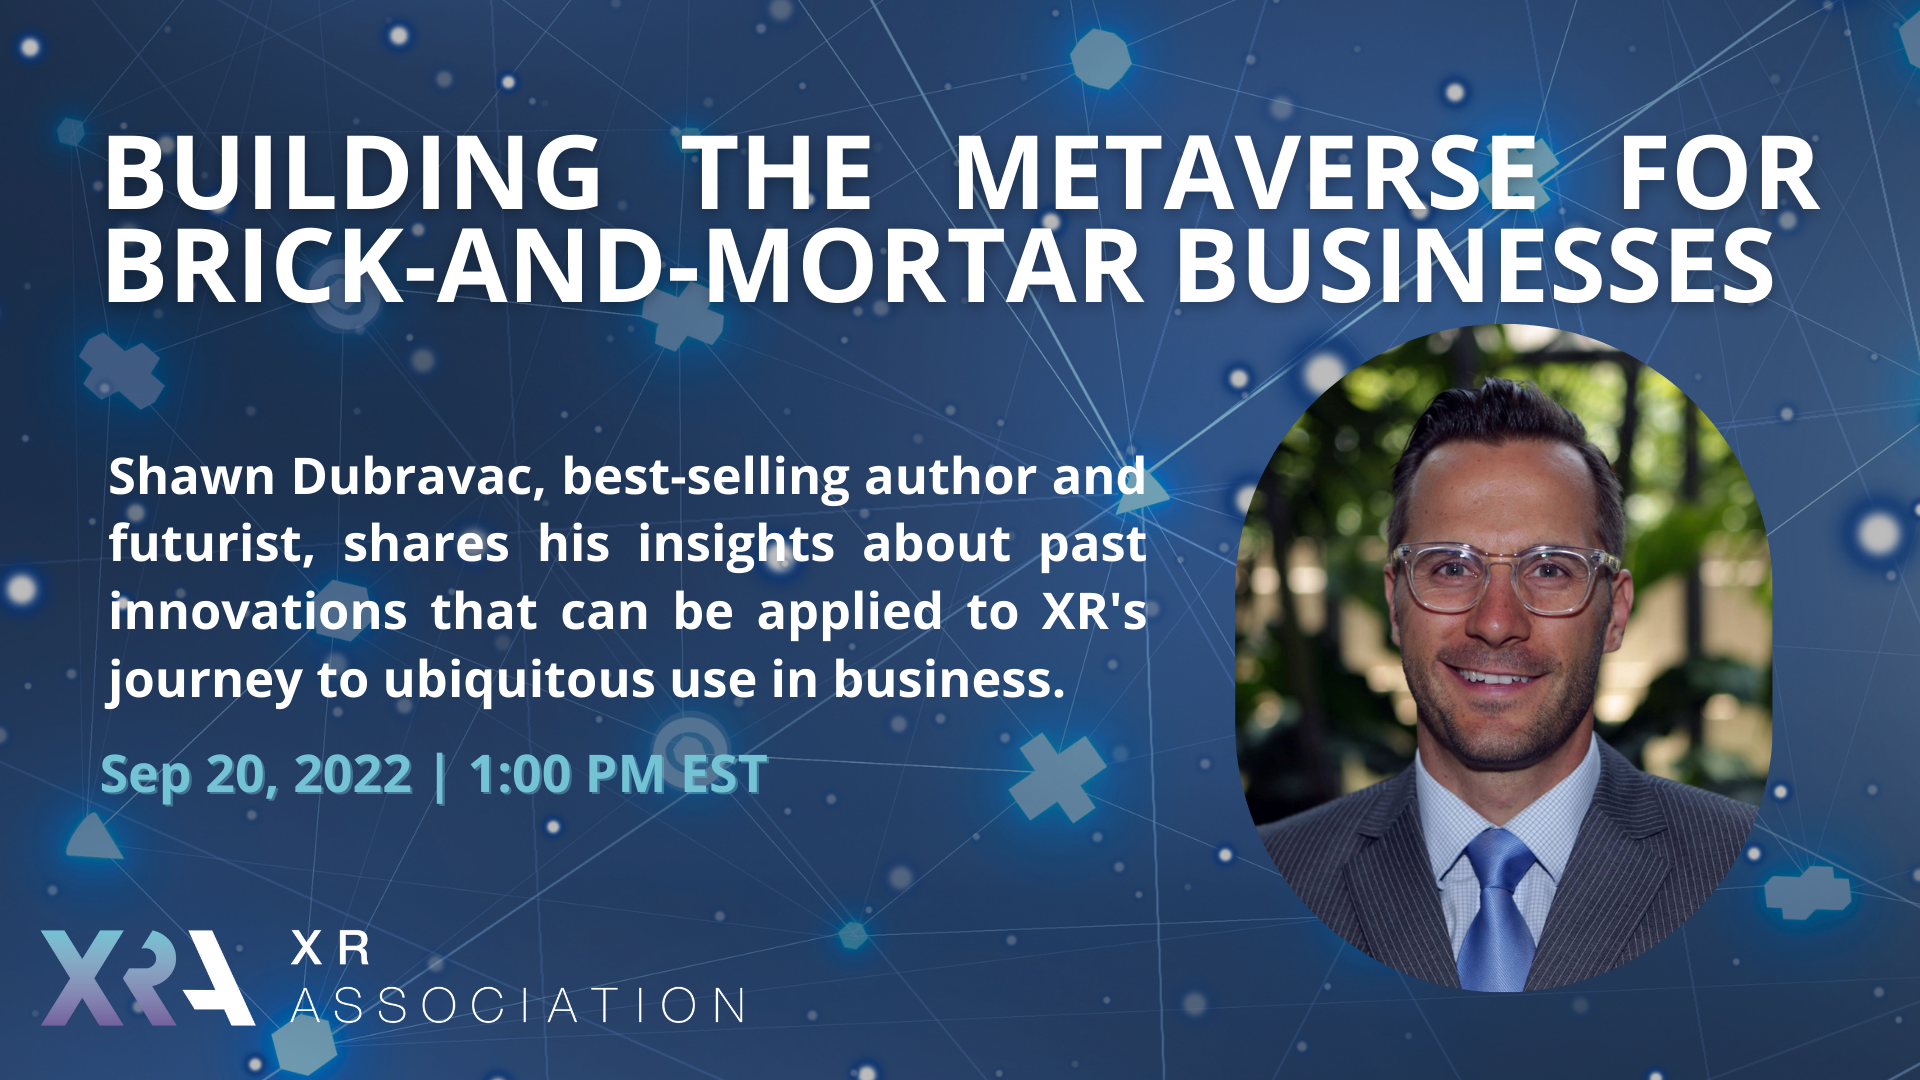 FREE WEBINAR HOSTED BY XRA ON 9/20 WITH NYT BEST-SELLING AUTHOR SHAWN DUBRAVAC